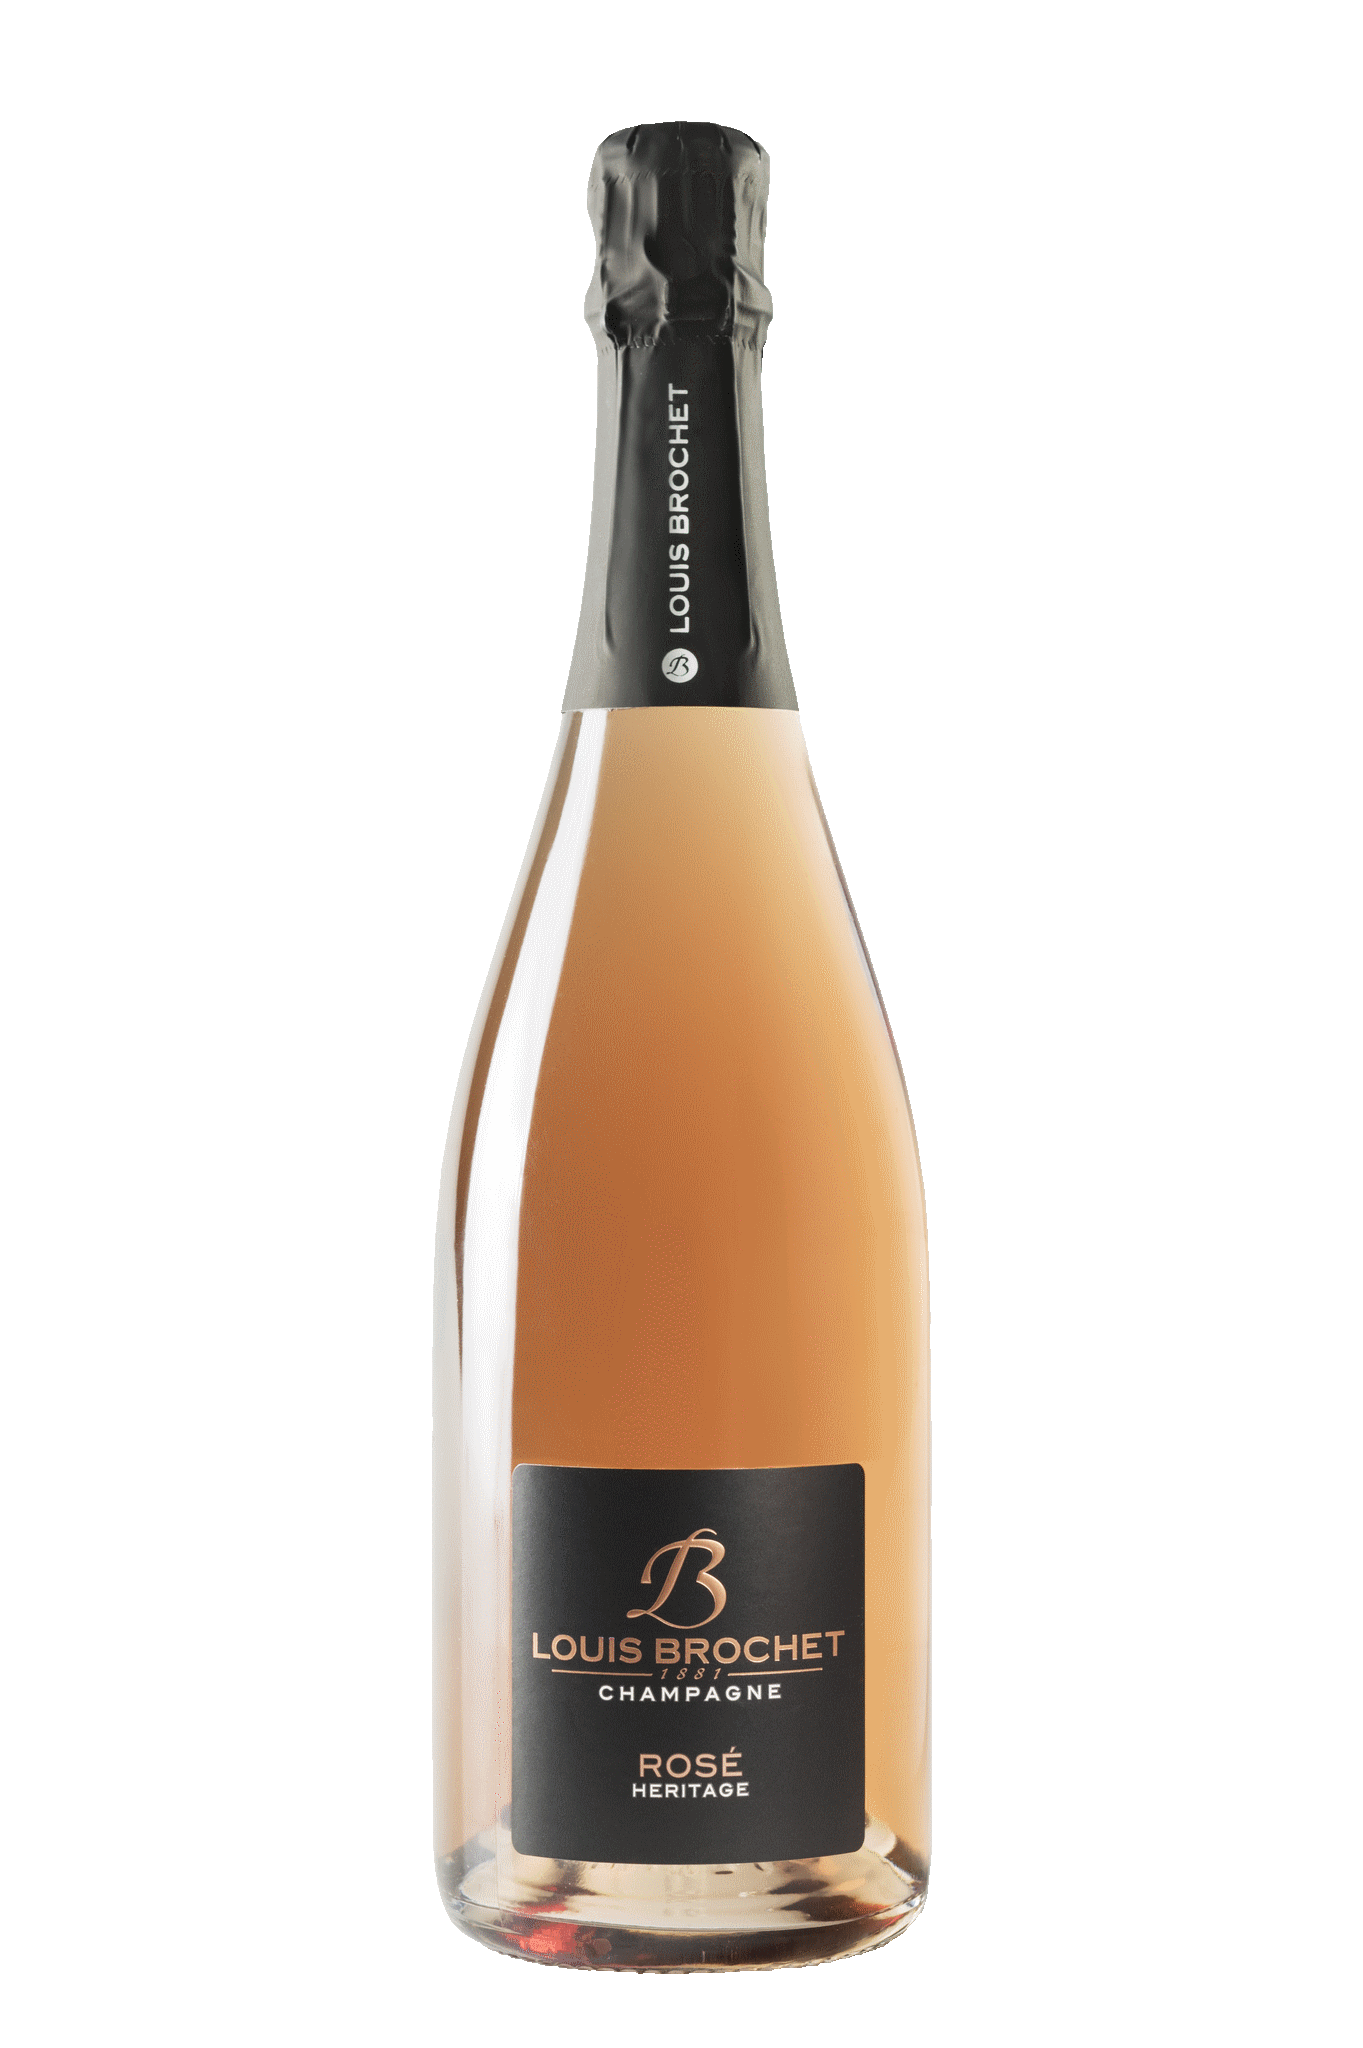 Champagne Louis Brochet - Rose Heritage